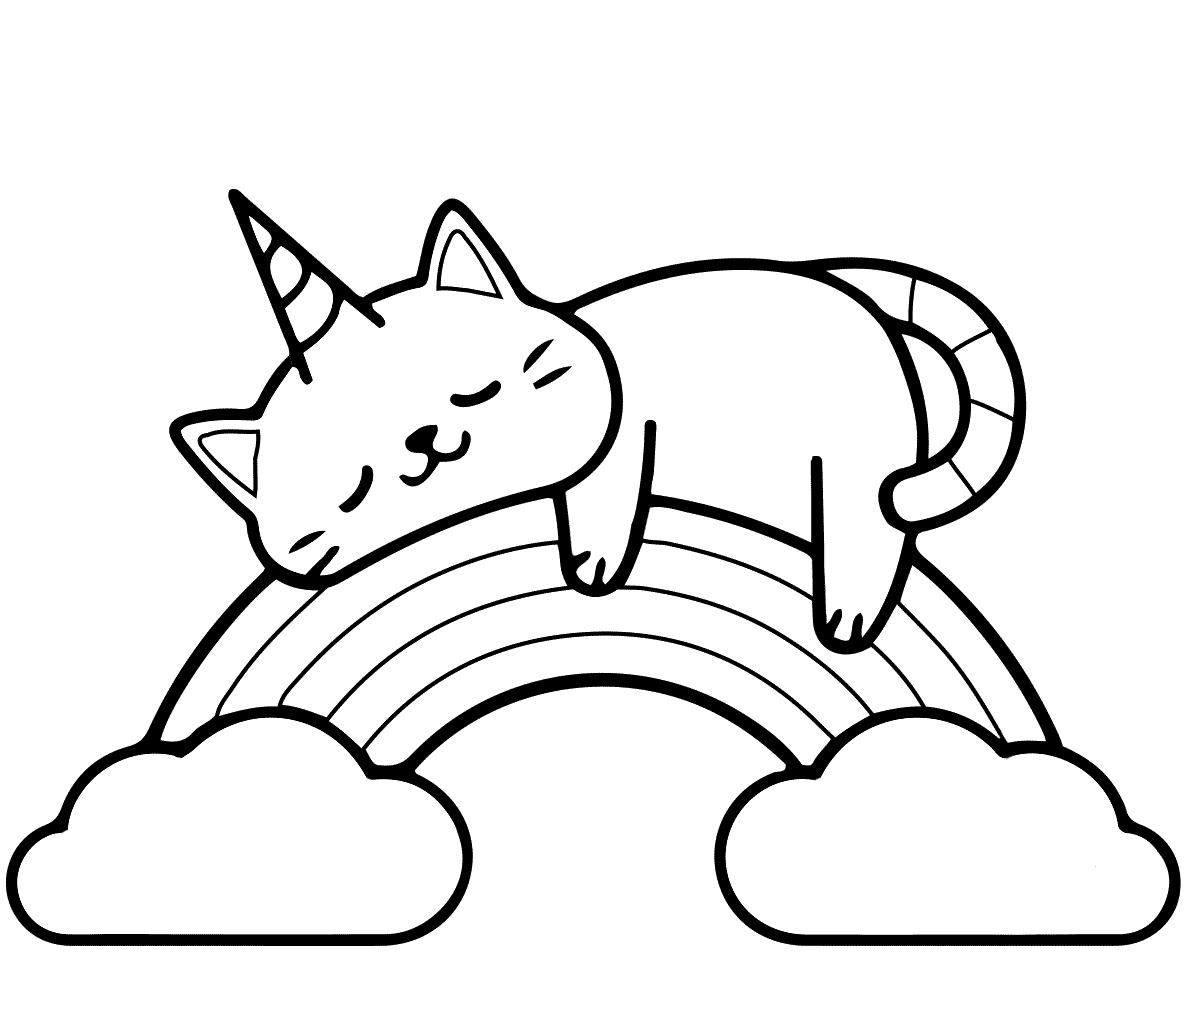 Unicorn Cat Sleeping On A Rainbow Coloring Page